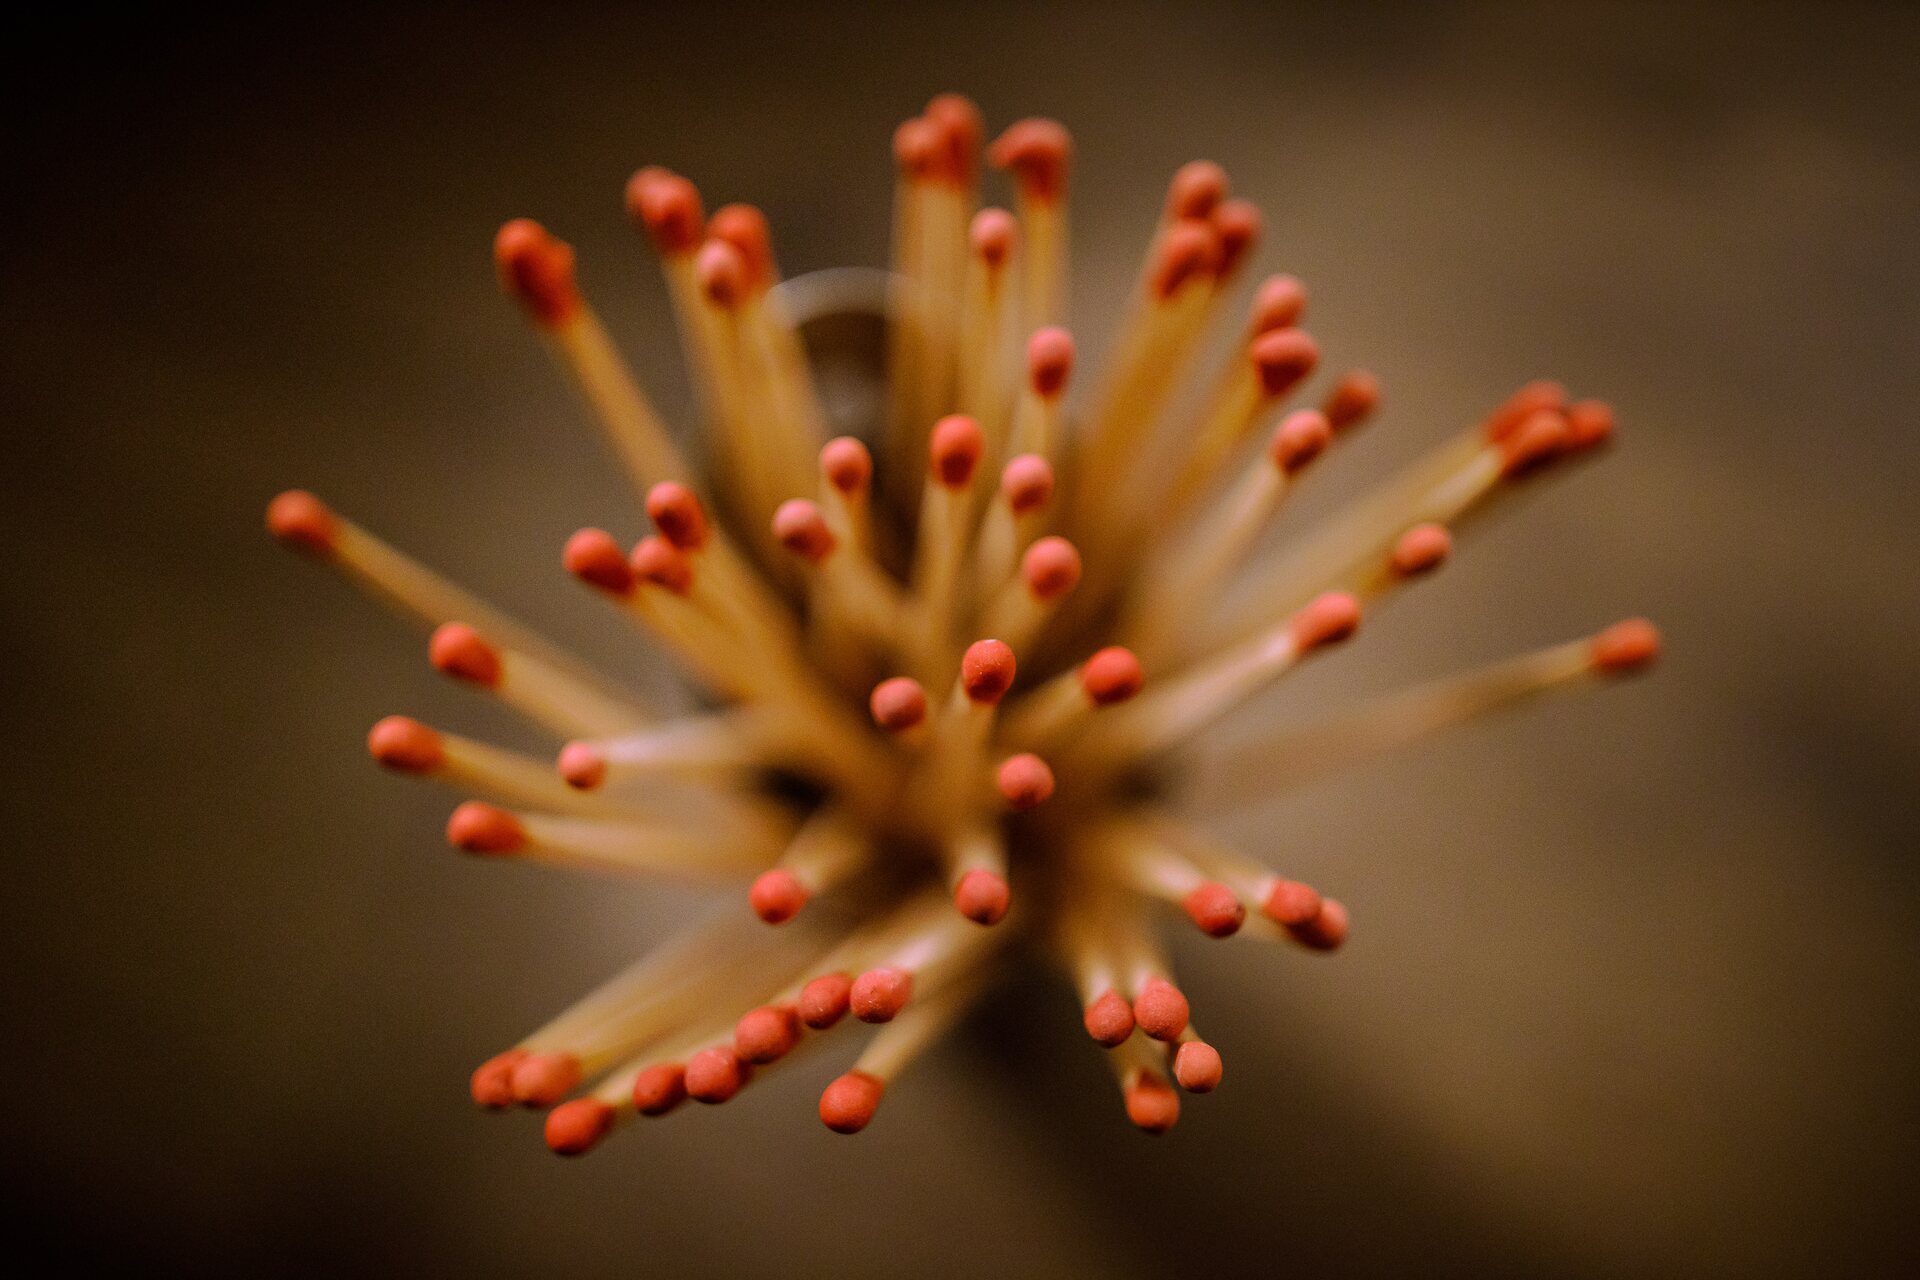 Matches in a glass